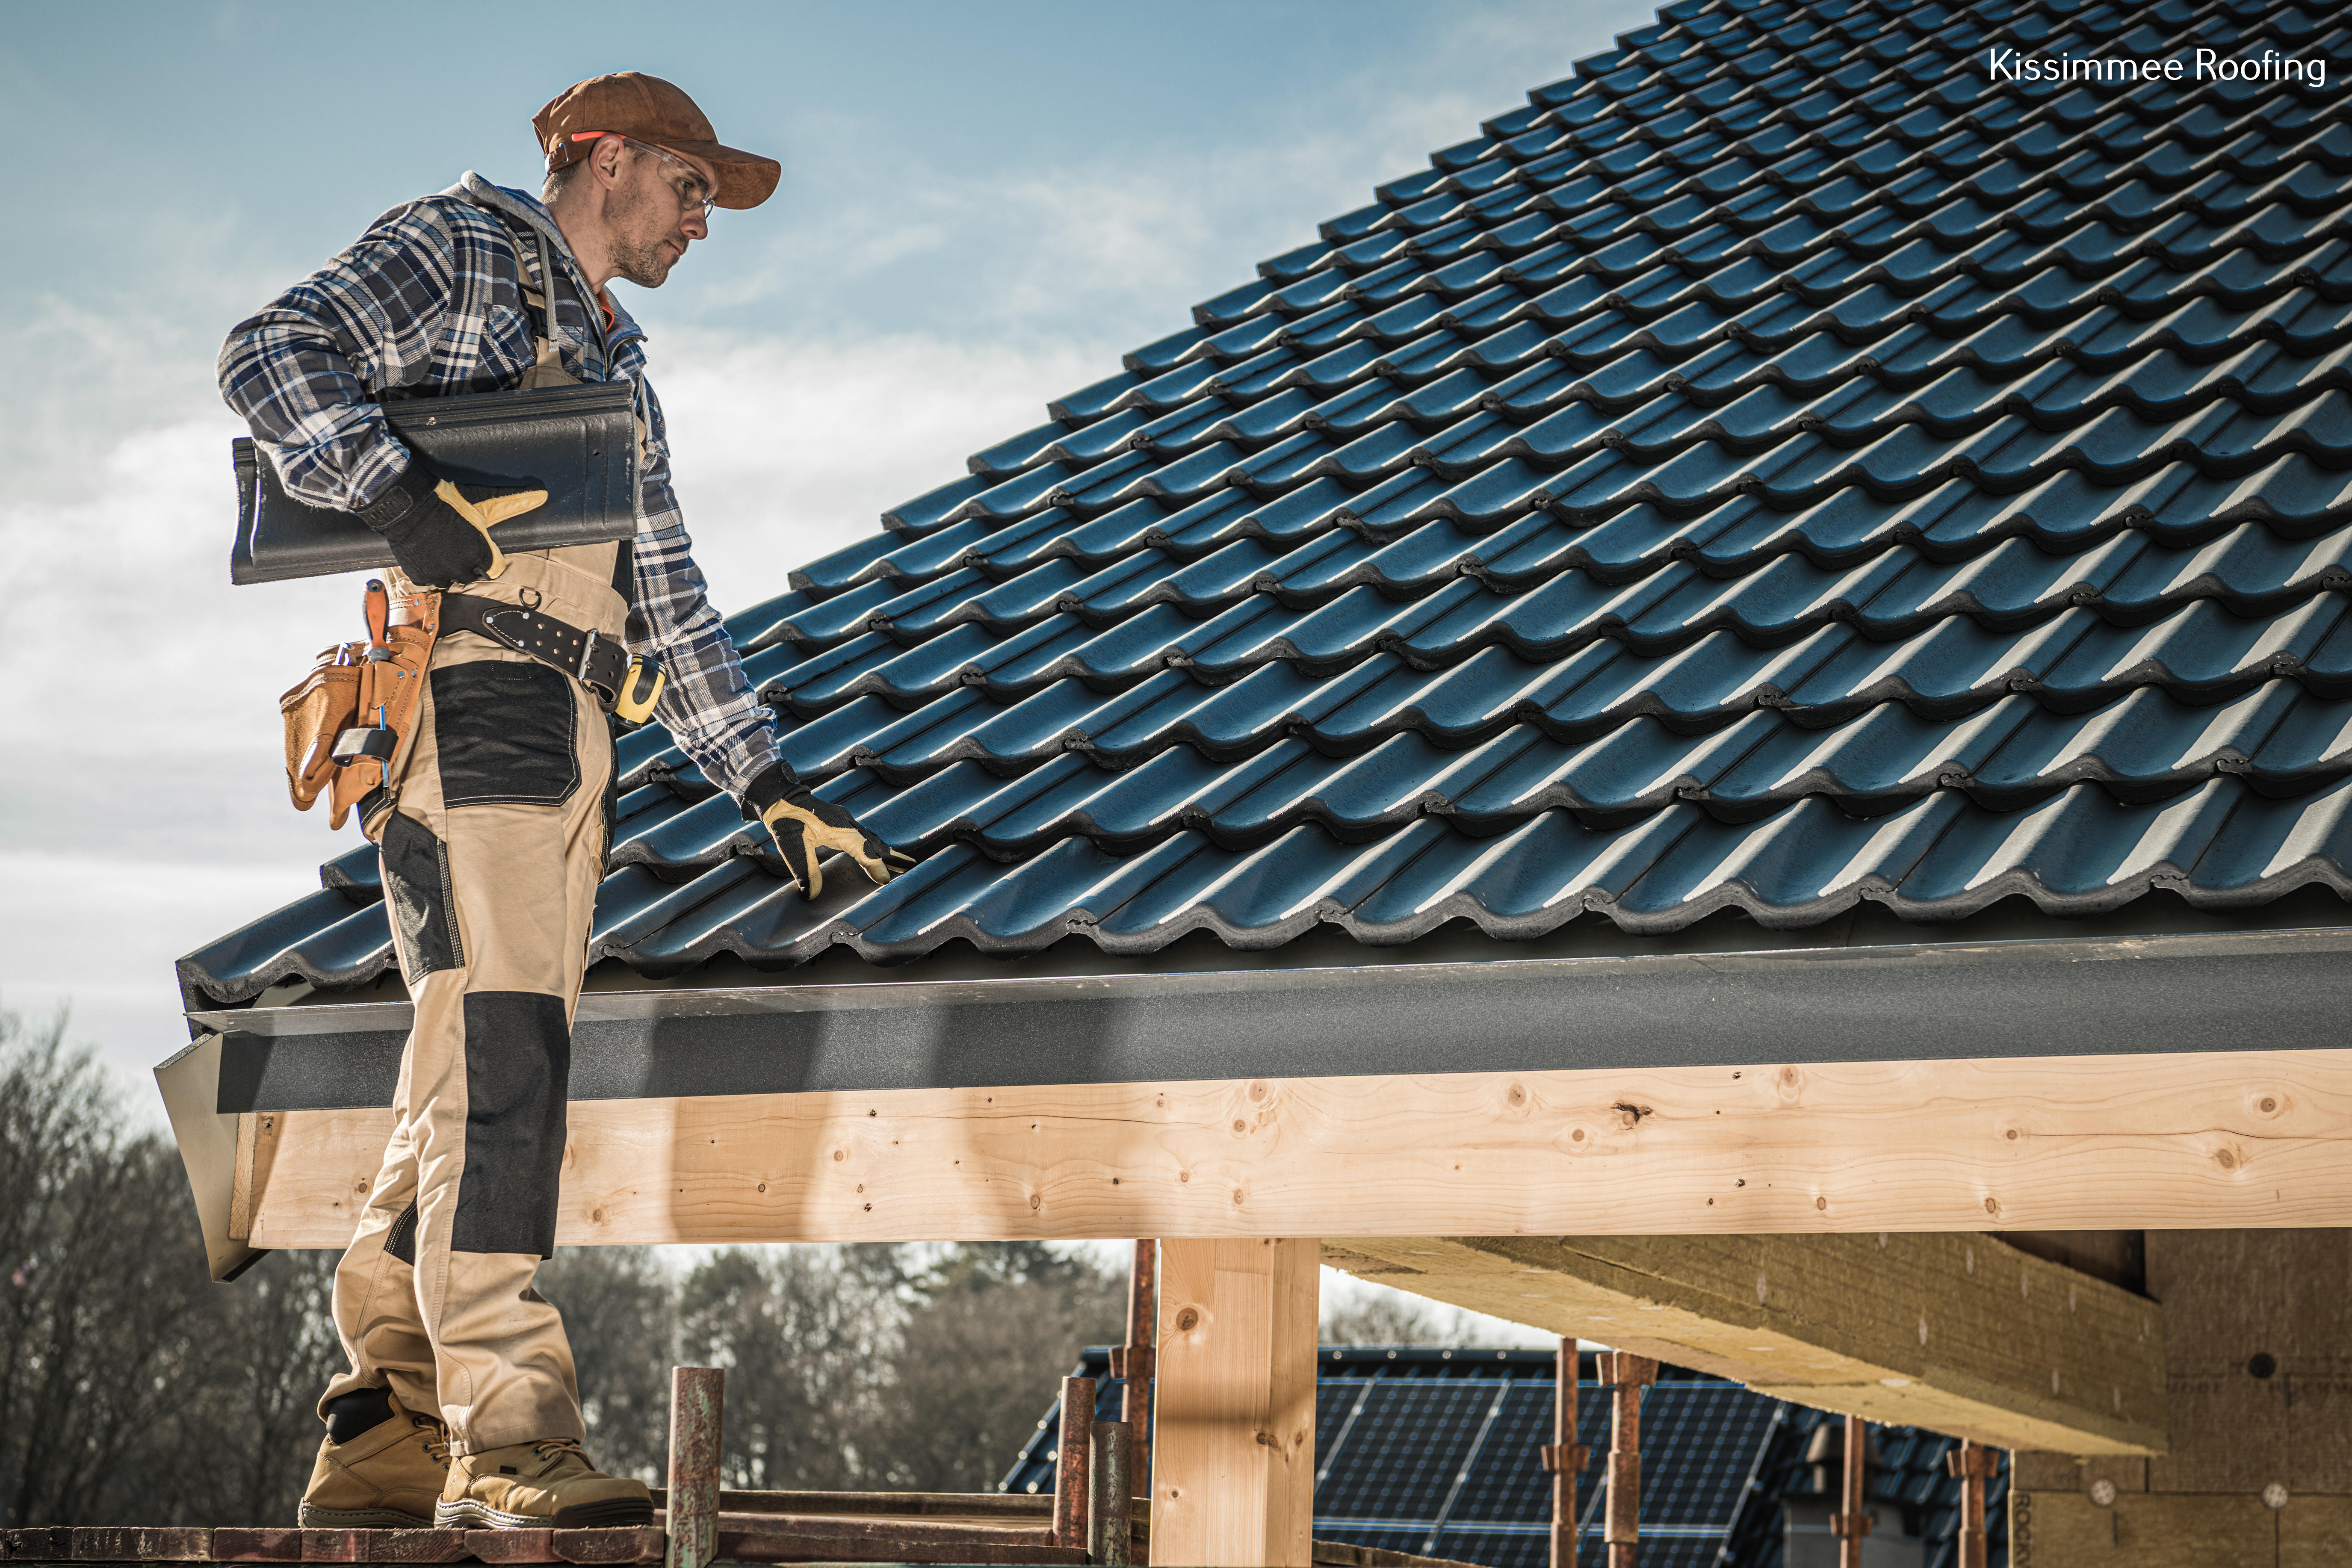 Affordable Roofing LLC Advises On the Factors to Consider When Choosing a Roofing Company in Kissimmee